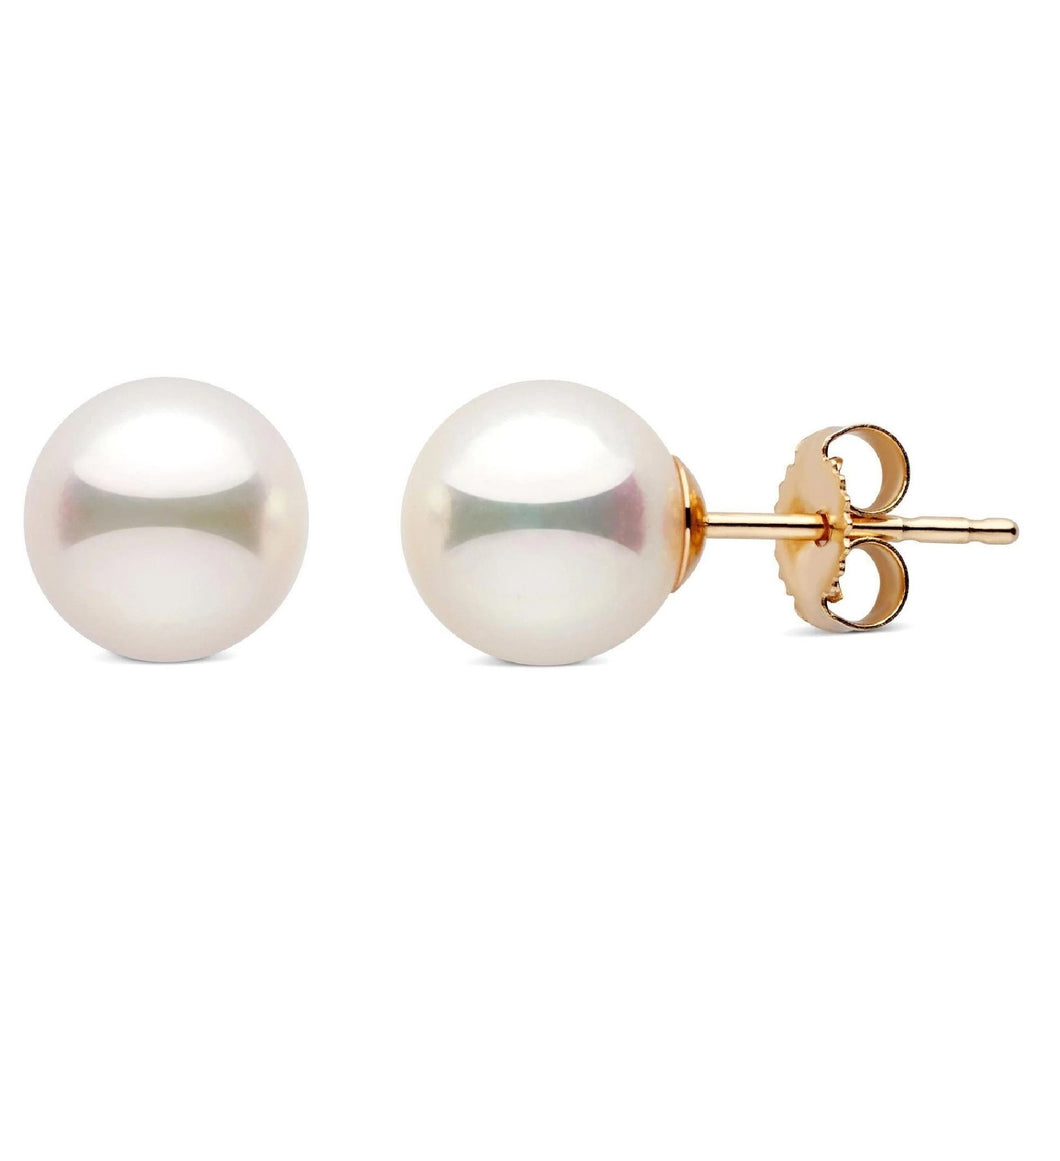 14k Gold 9.0mm Fresh Water Pearl Stud Earring, Available in White and Yellow Gold